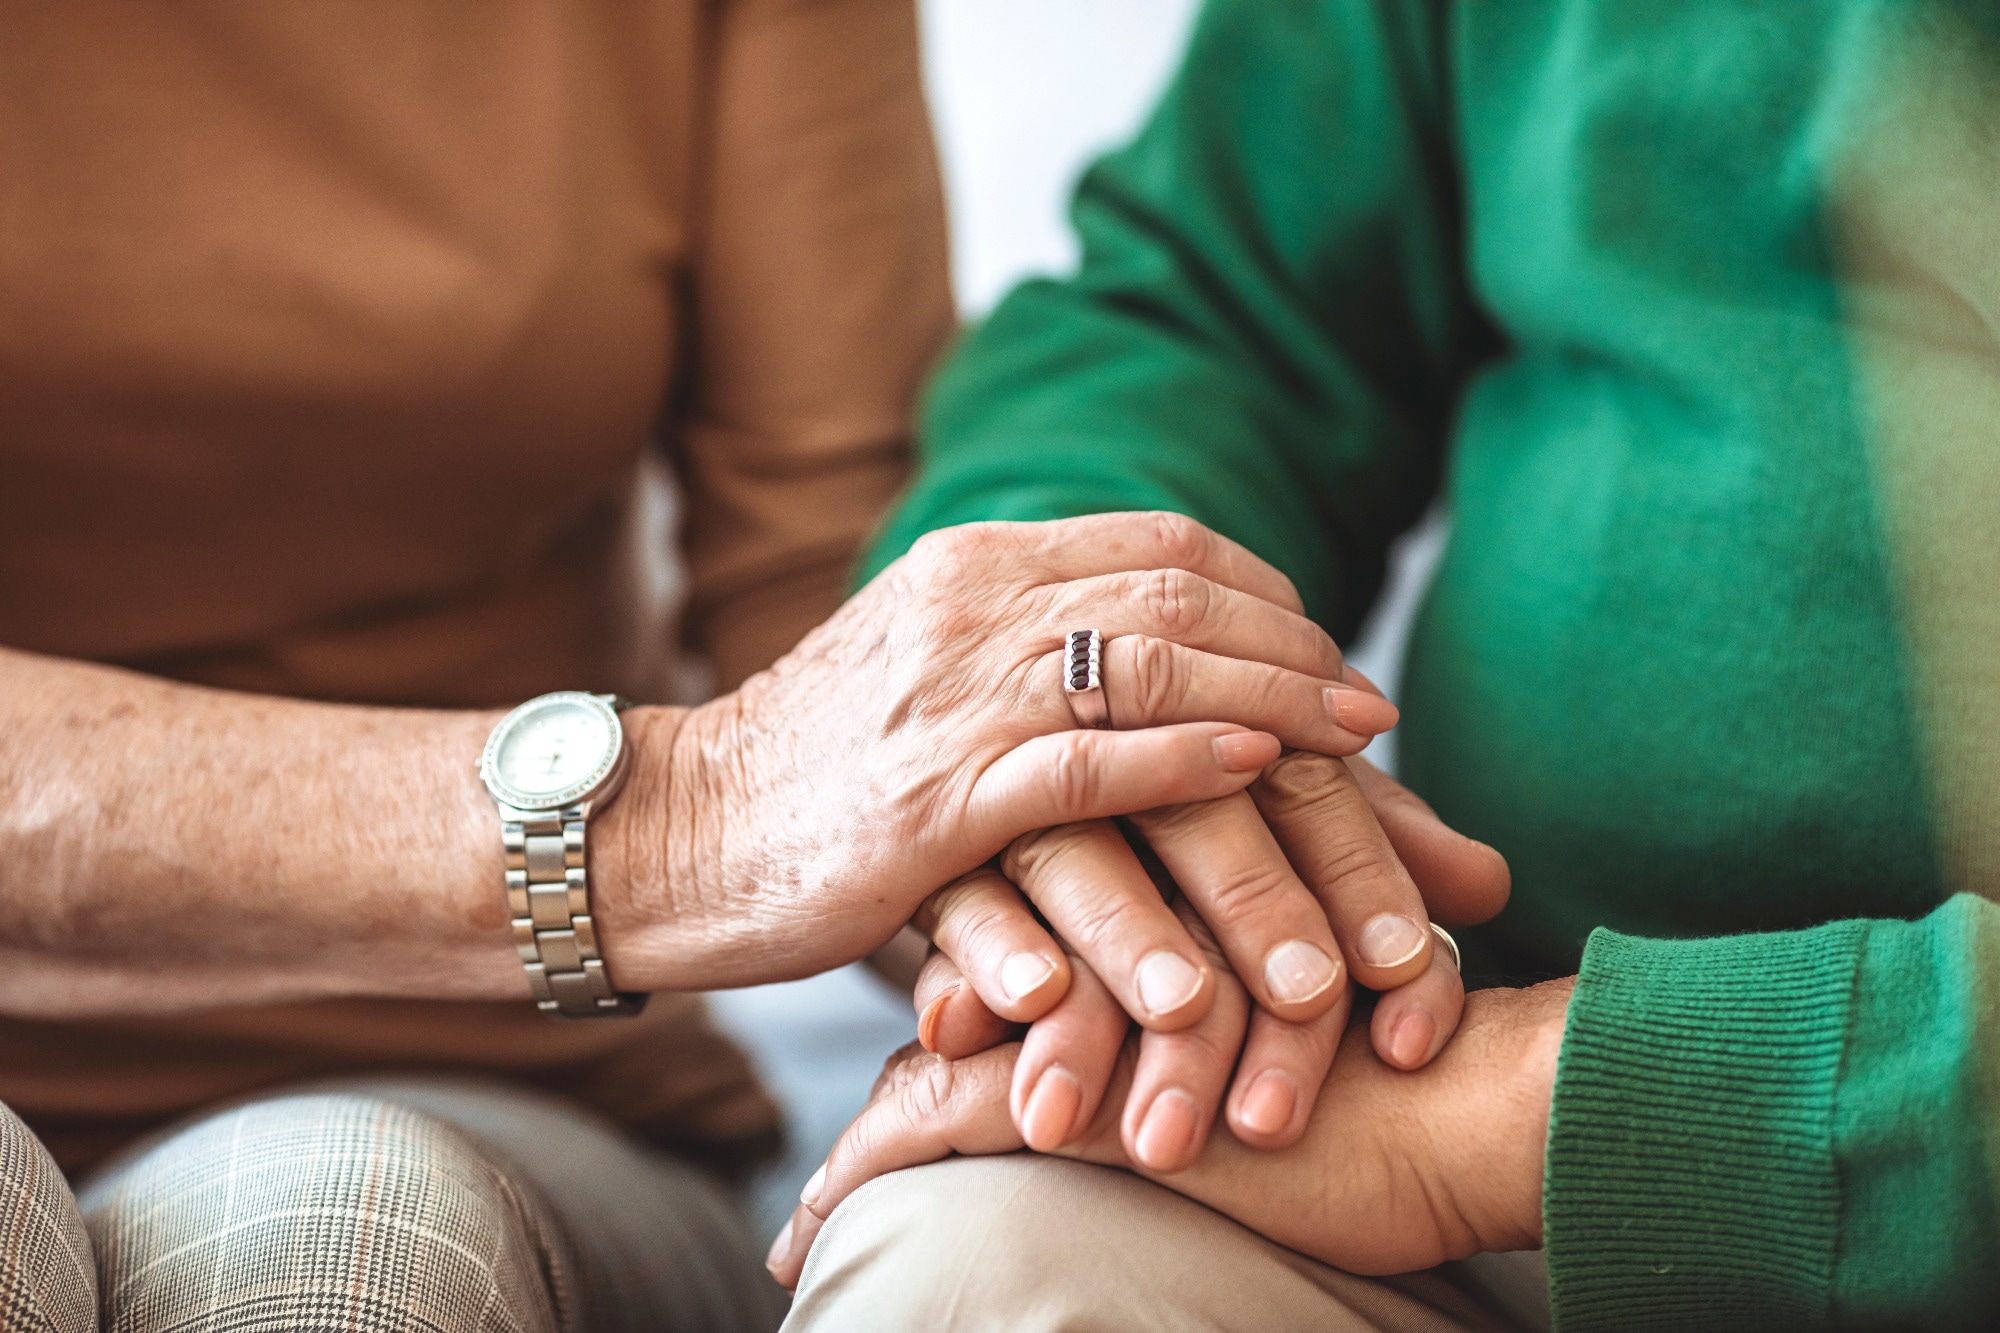 Study: Marital Histories and Associations With Later-Life Dementia and Mild Cognitive Impairment Risk in the HUNT4 70+ Study in Norway. Image Credit: Dragana Gordic / Shutterstock